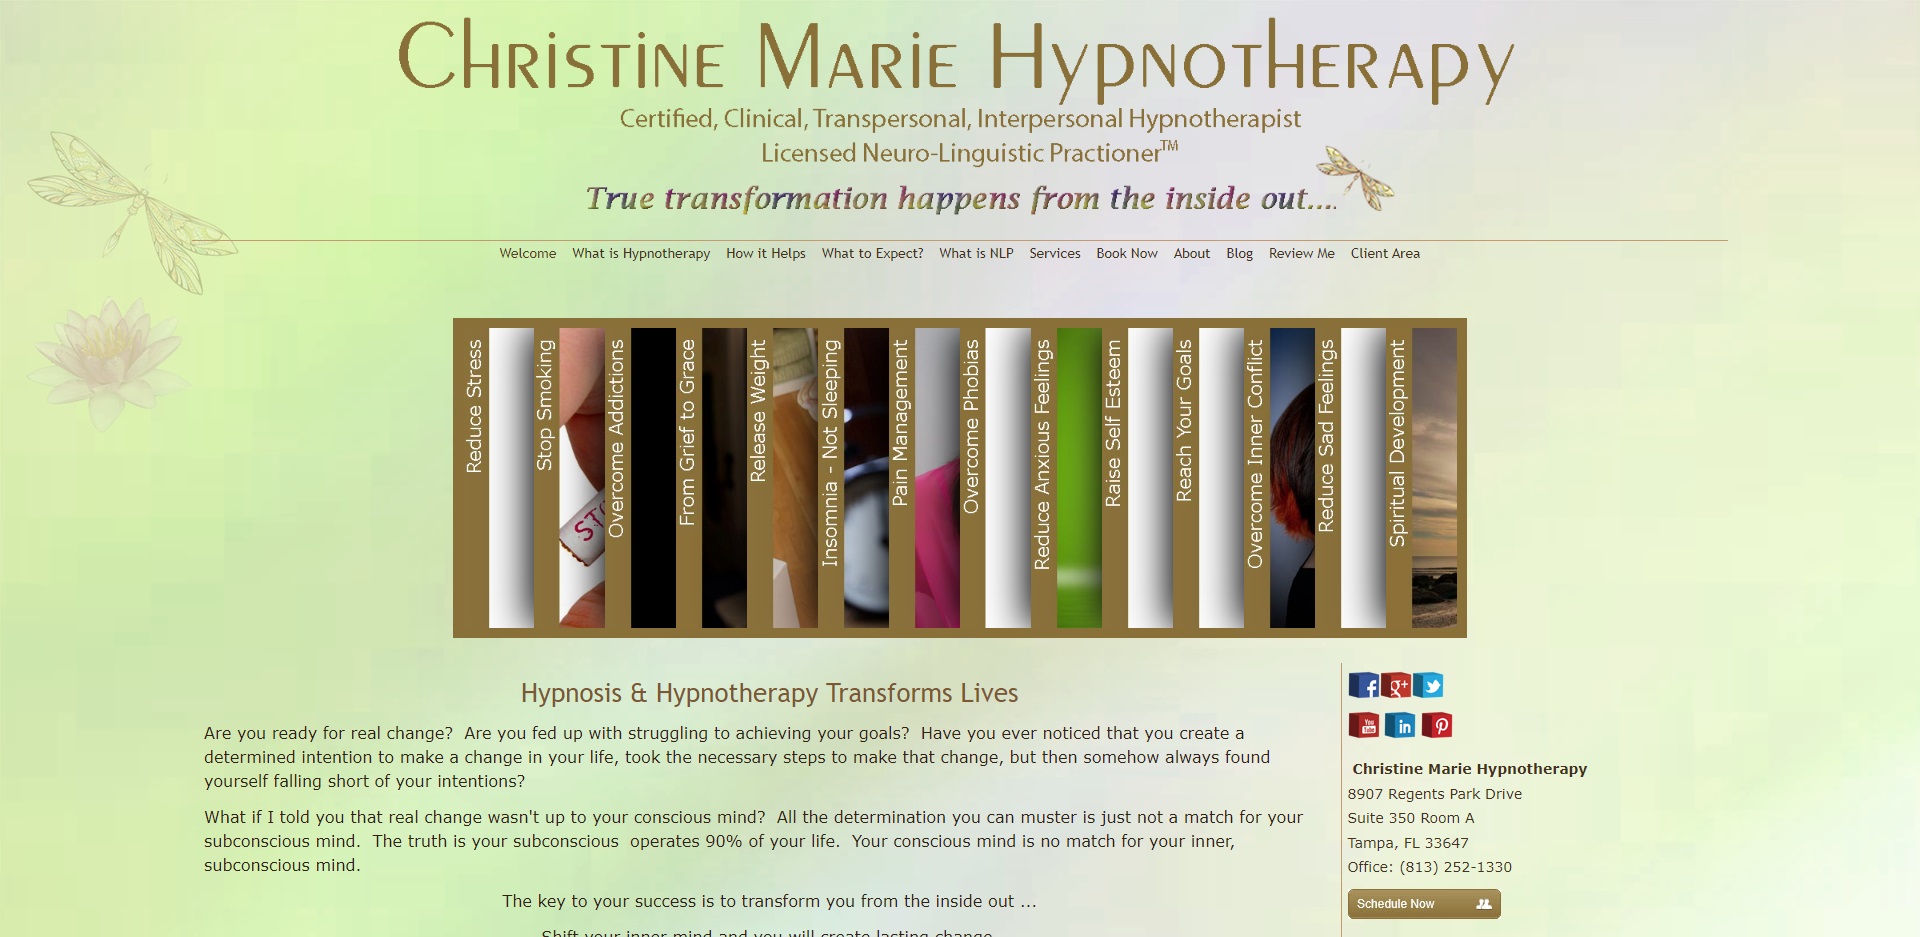 Best Hypnotherapy in Tampa, FL